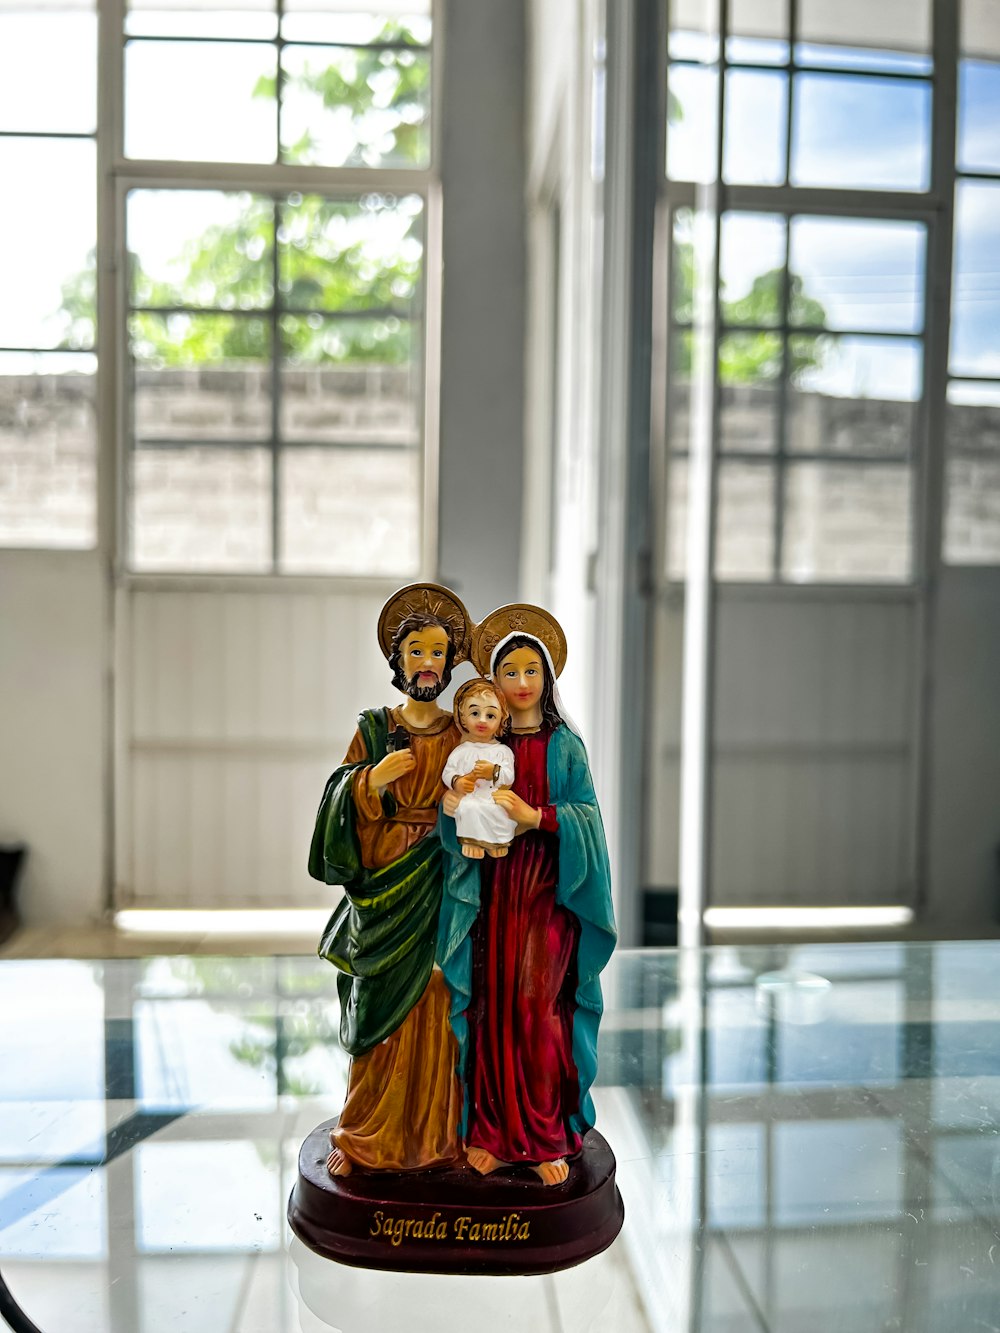 a statue of the virgin mary holding a baby jesus